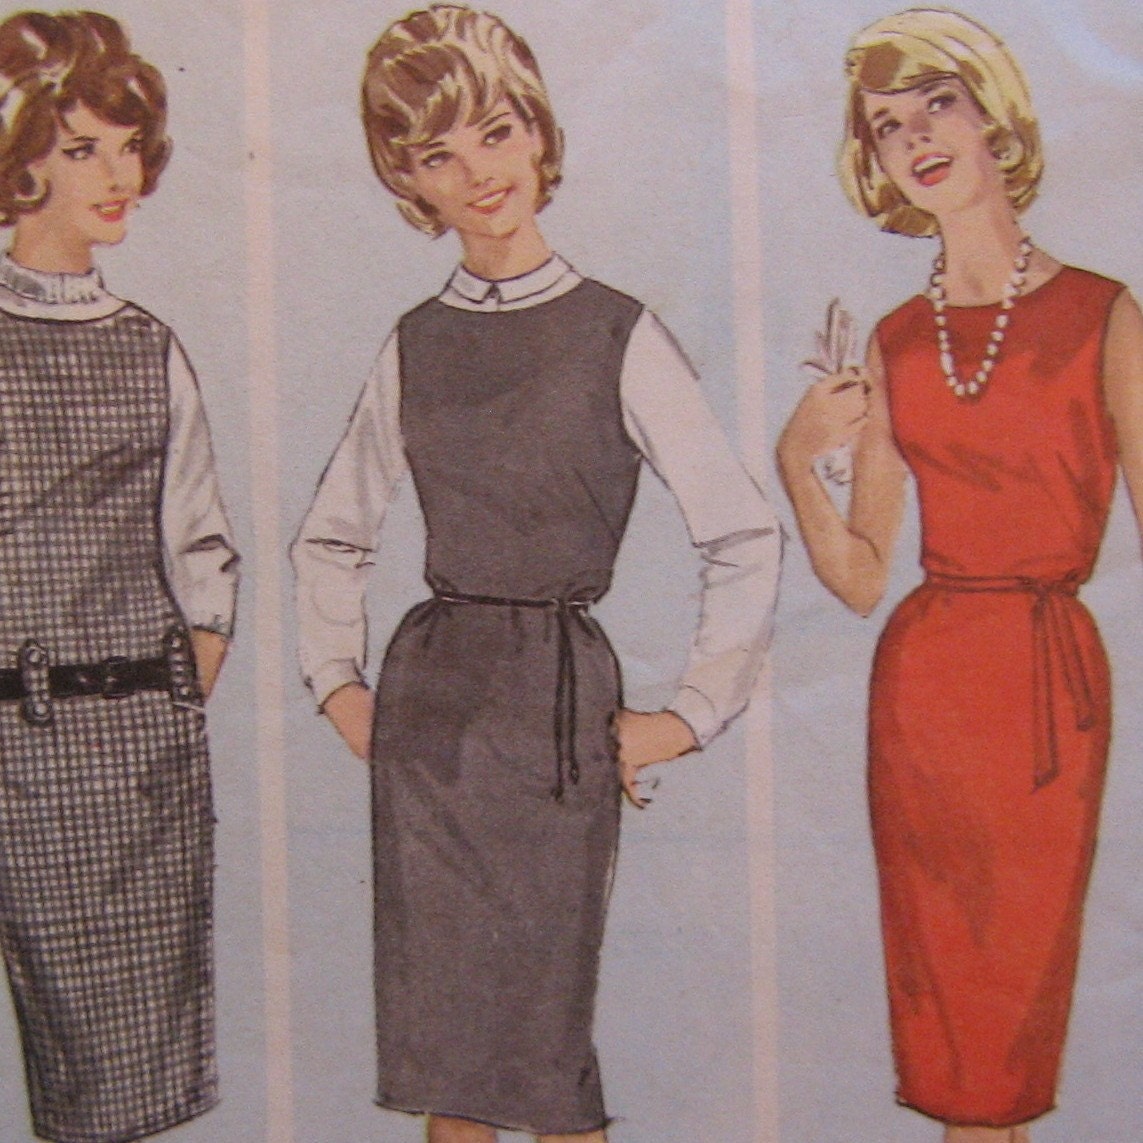 Simplicity 3833 - Misses Dress - Sewing classes, patterns and